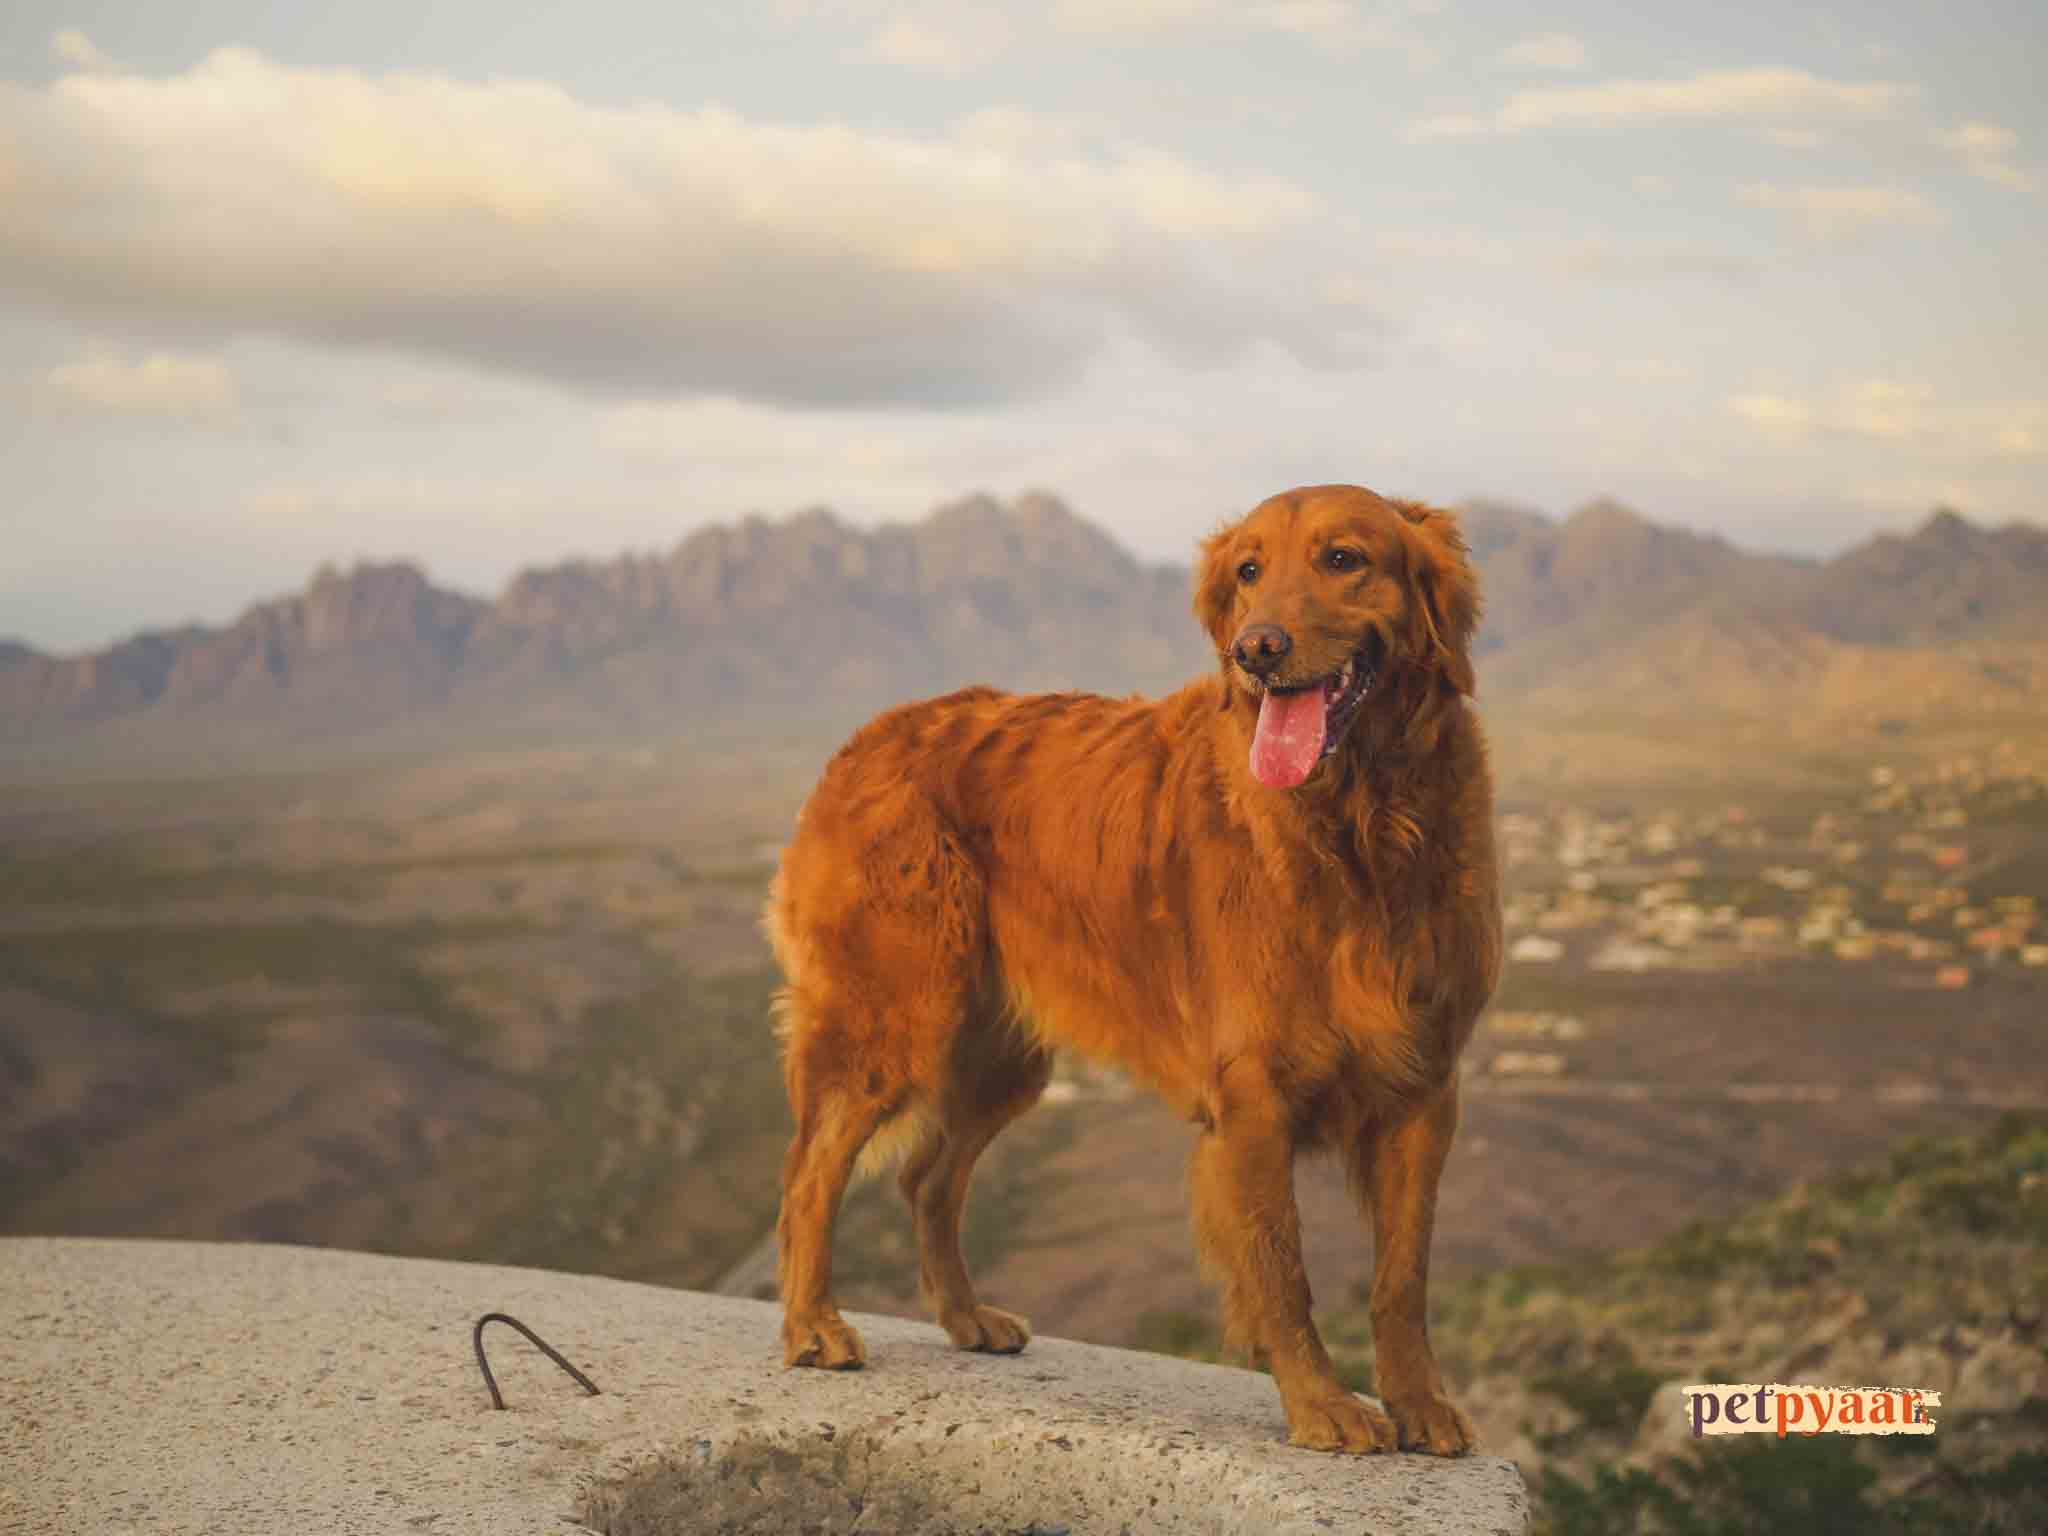 "Finding the Best Golden Retriever Vet in India: Specialized Care for Your Beloved Companion"